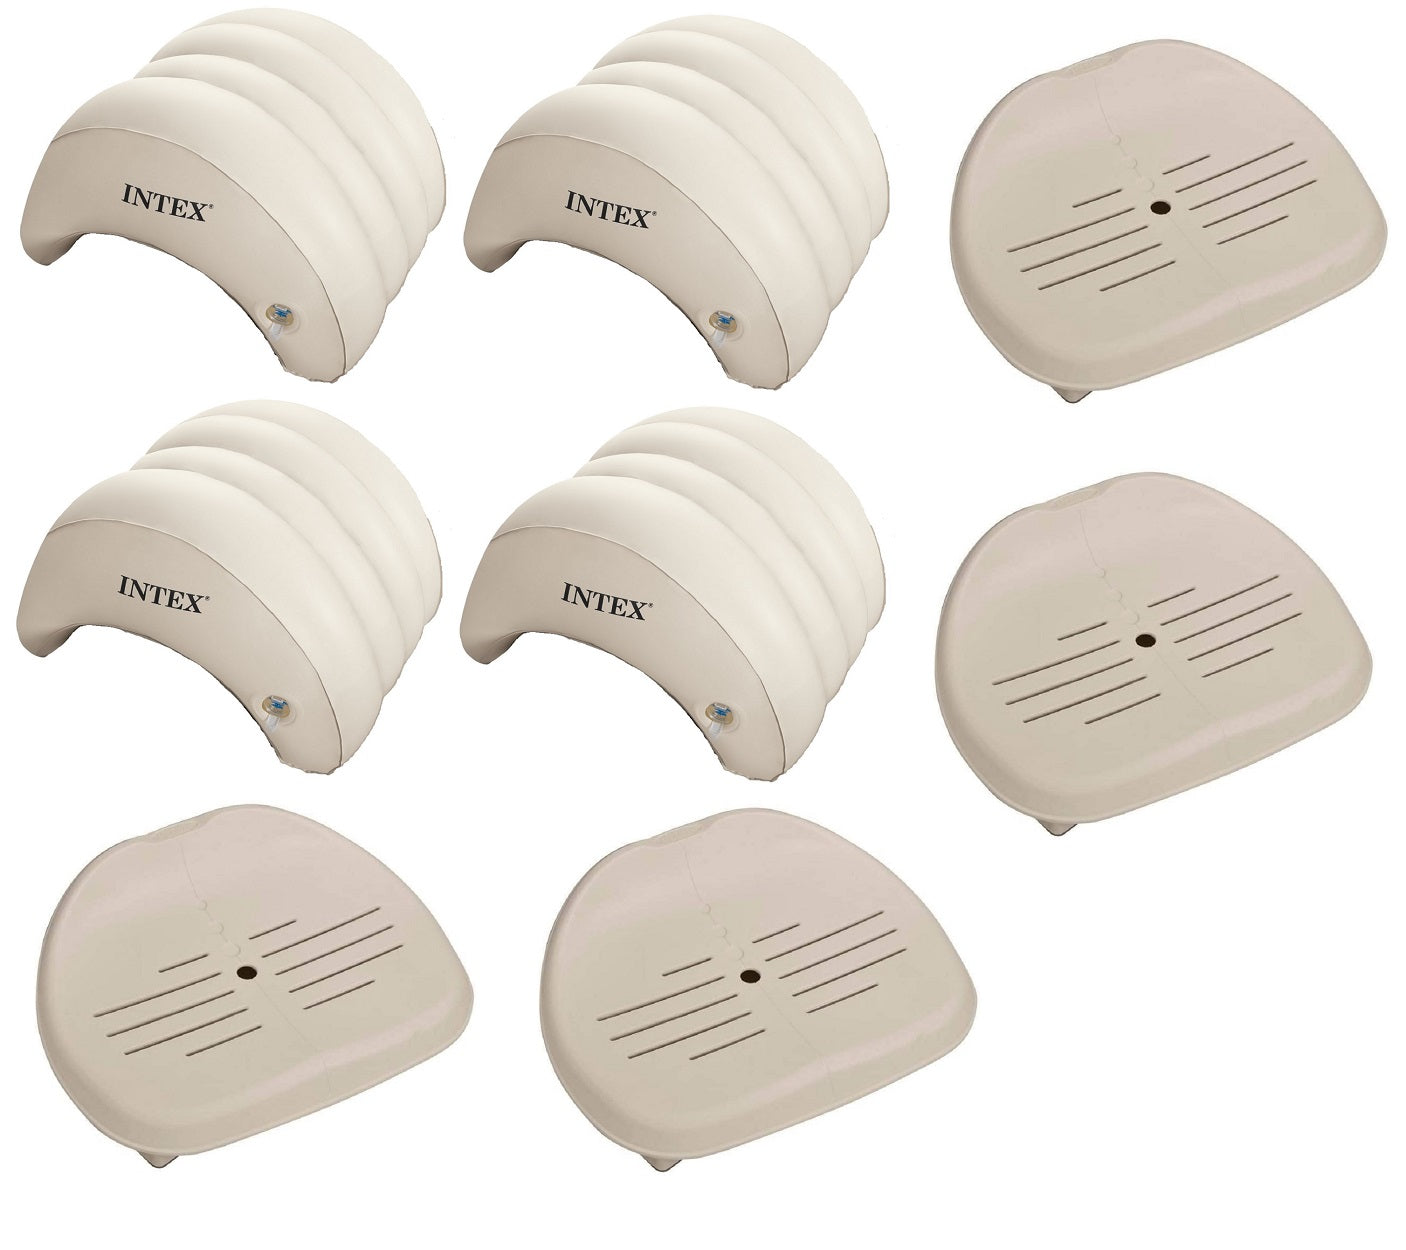 Intex PureSpa Headrest and Seat Accessories (4-Pack)